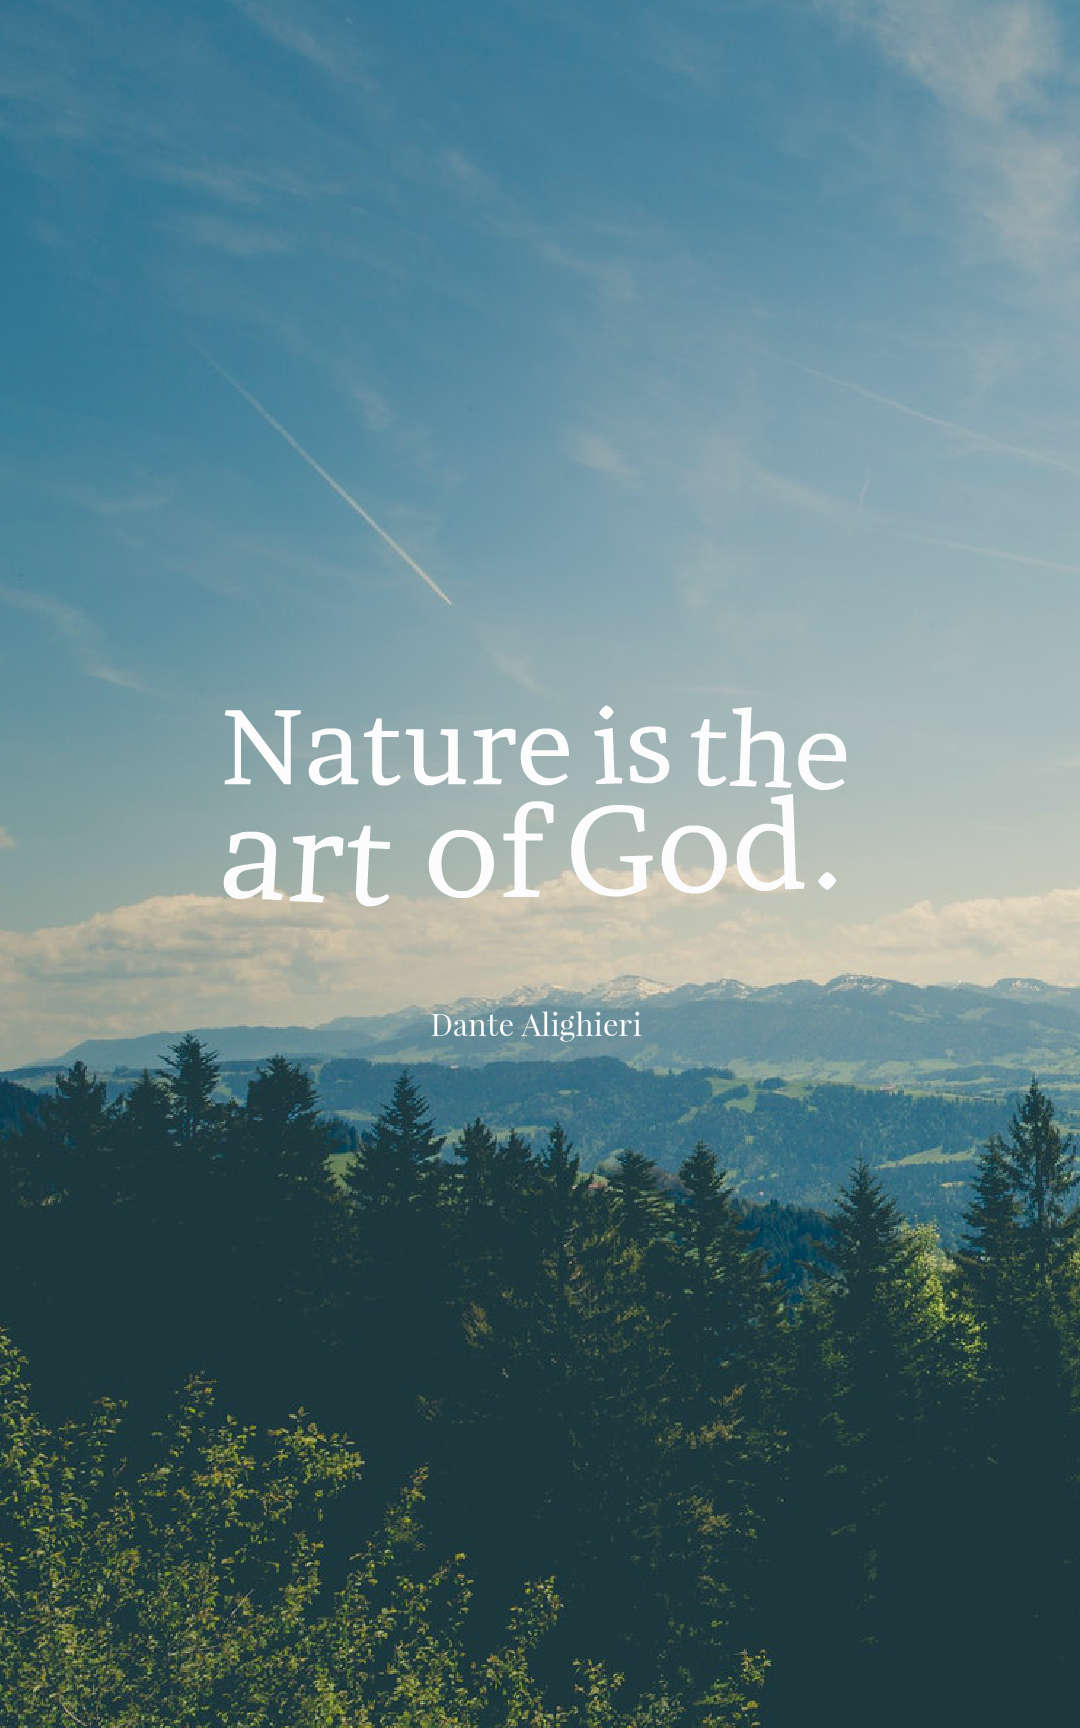 Nature is the art of God.